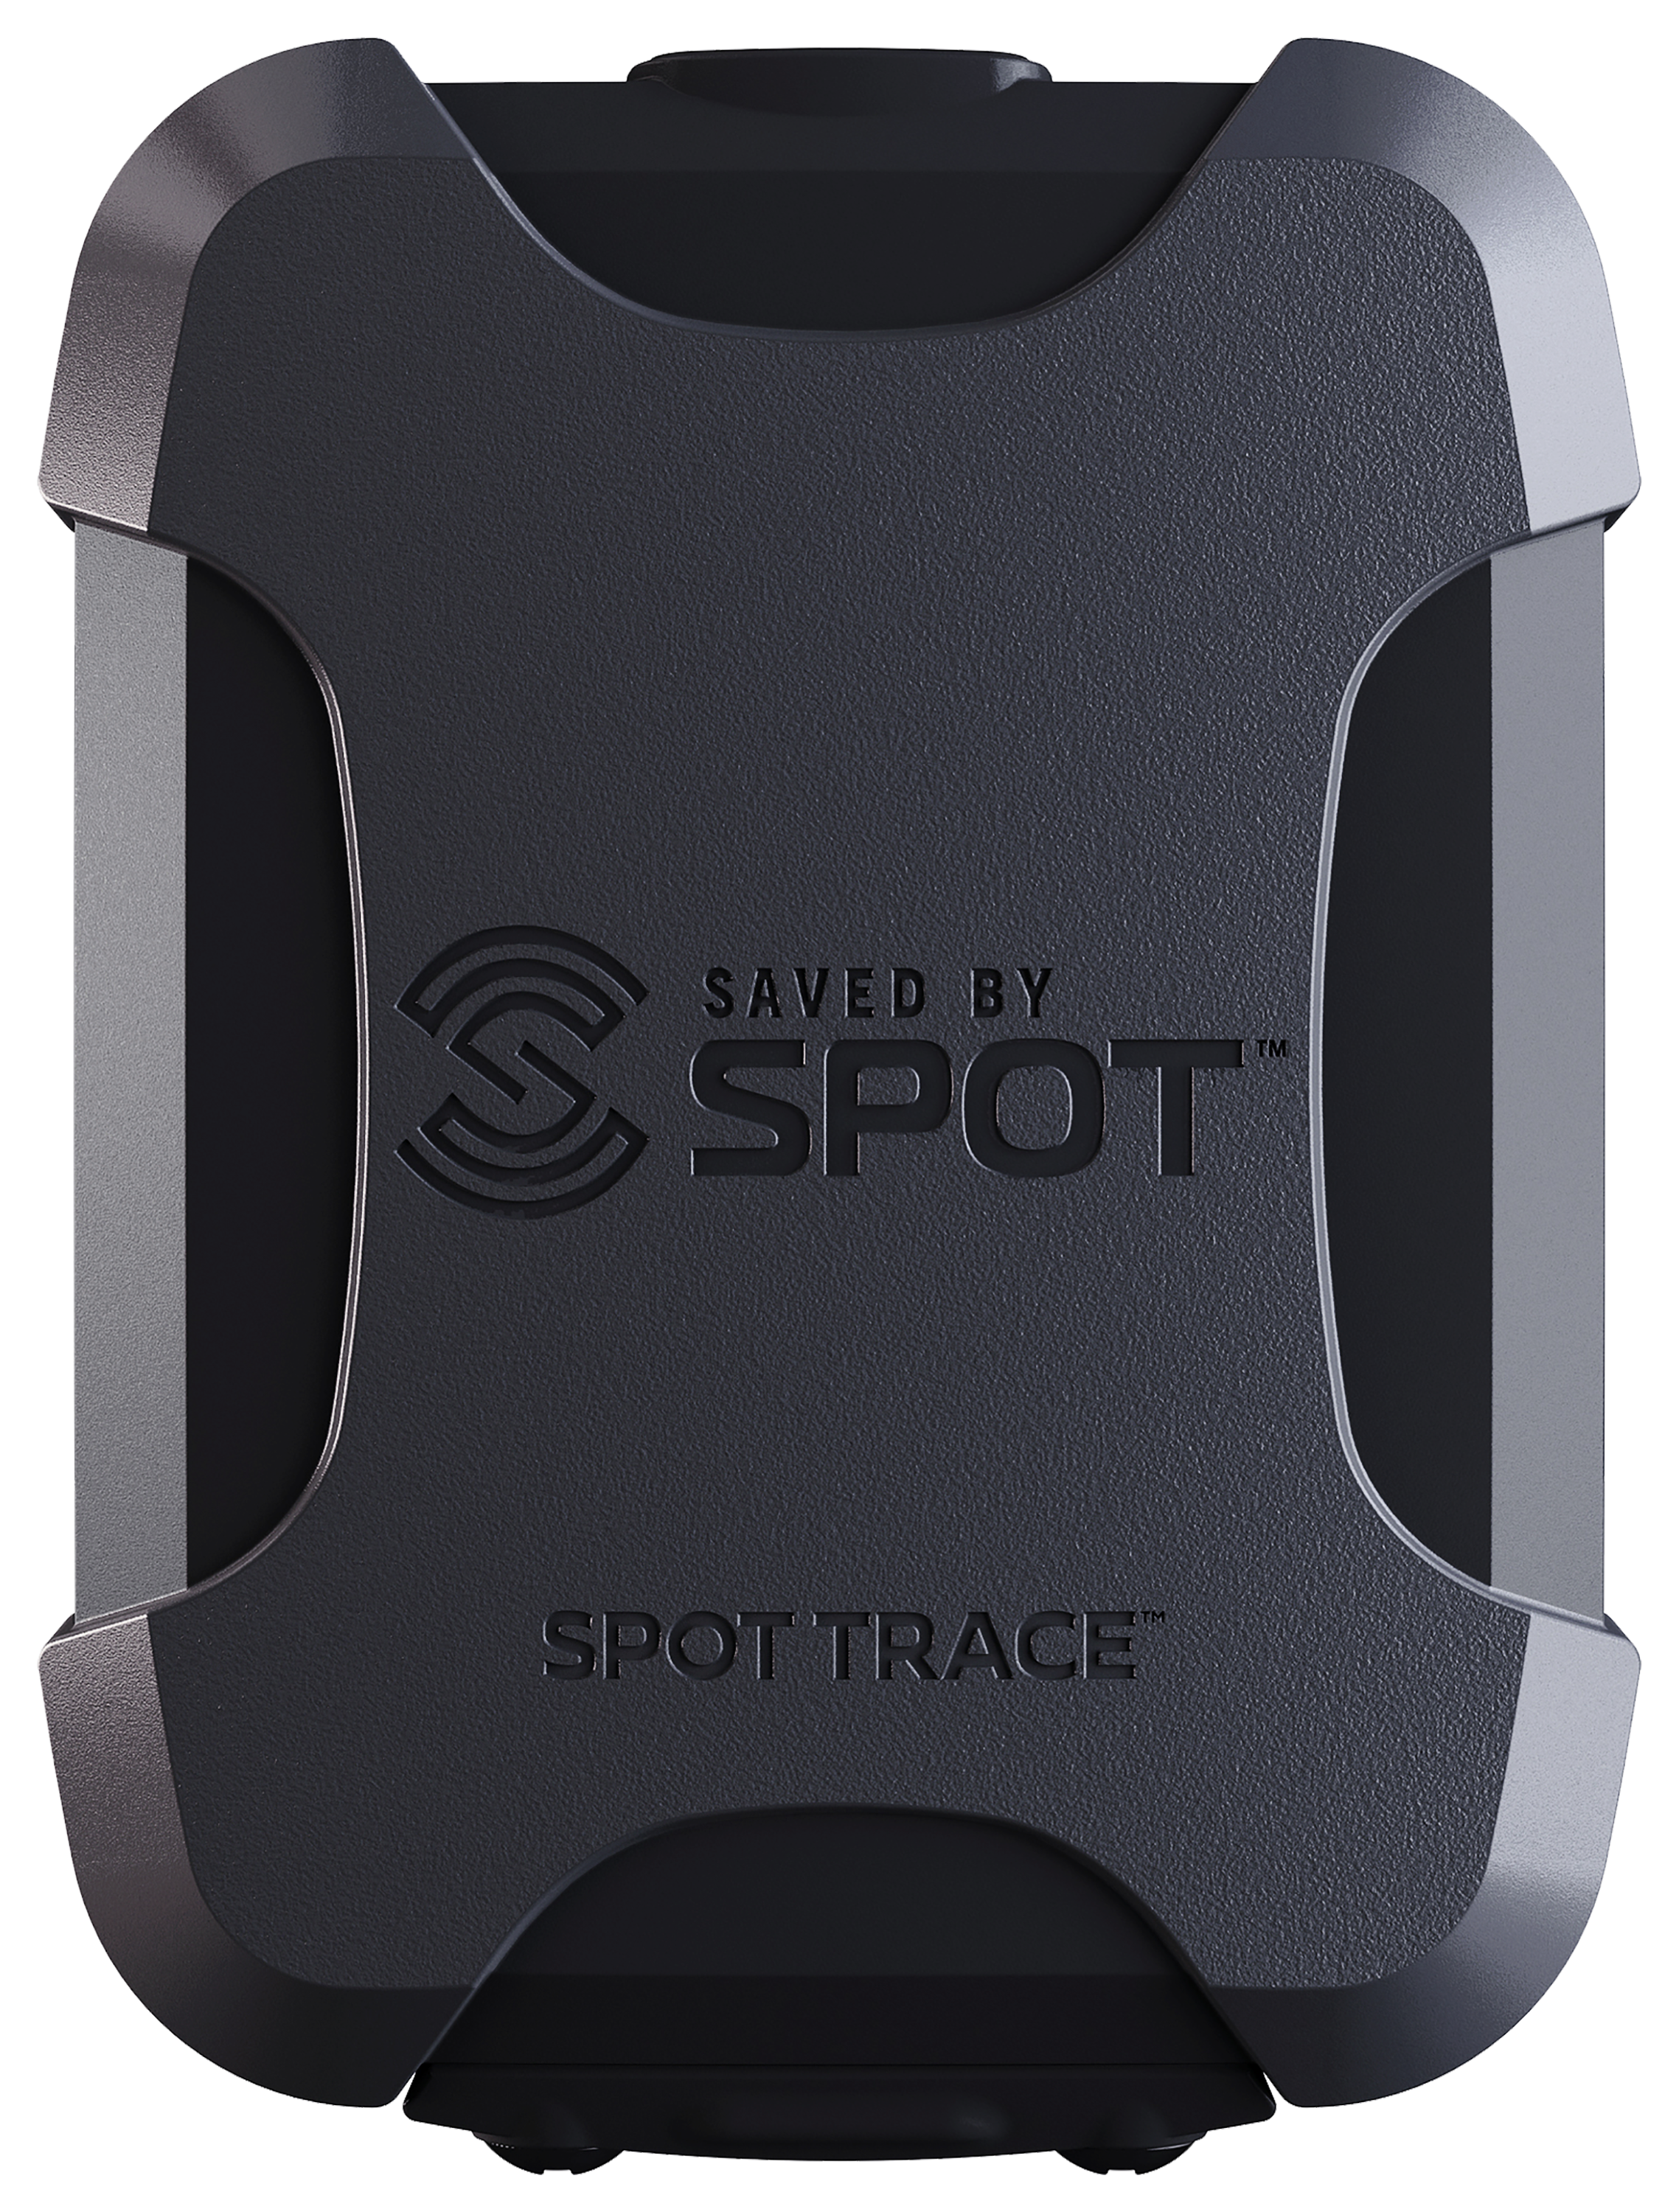 SPOT Motion-Activated Tracking | Pro Shops